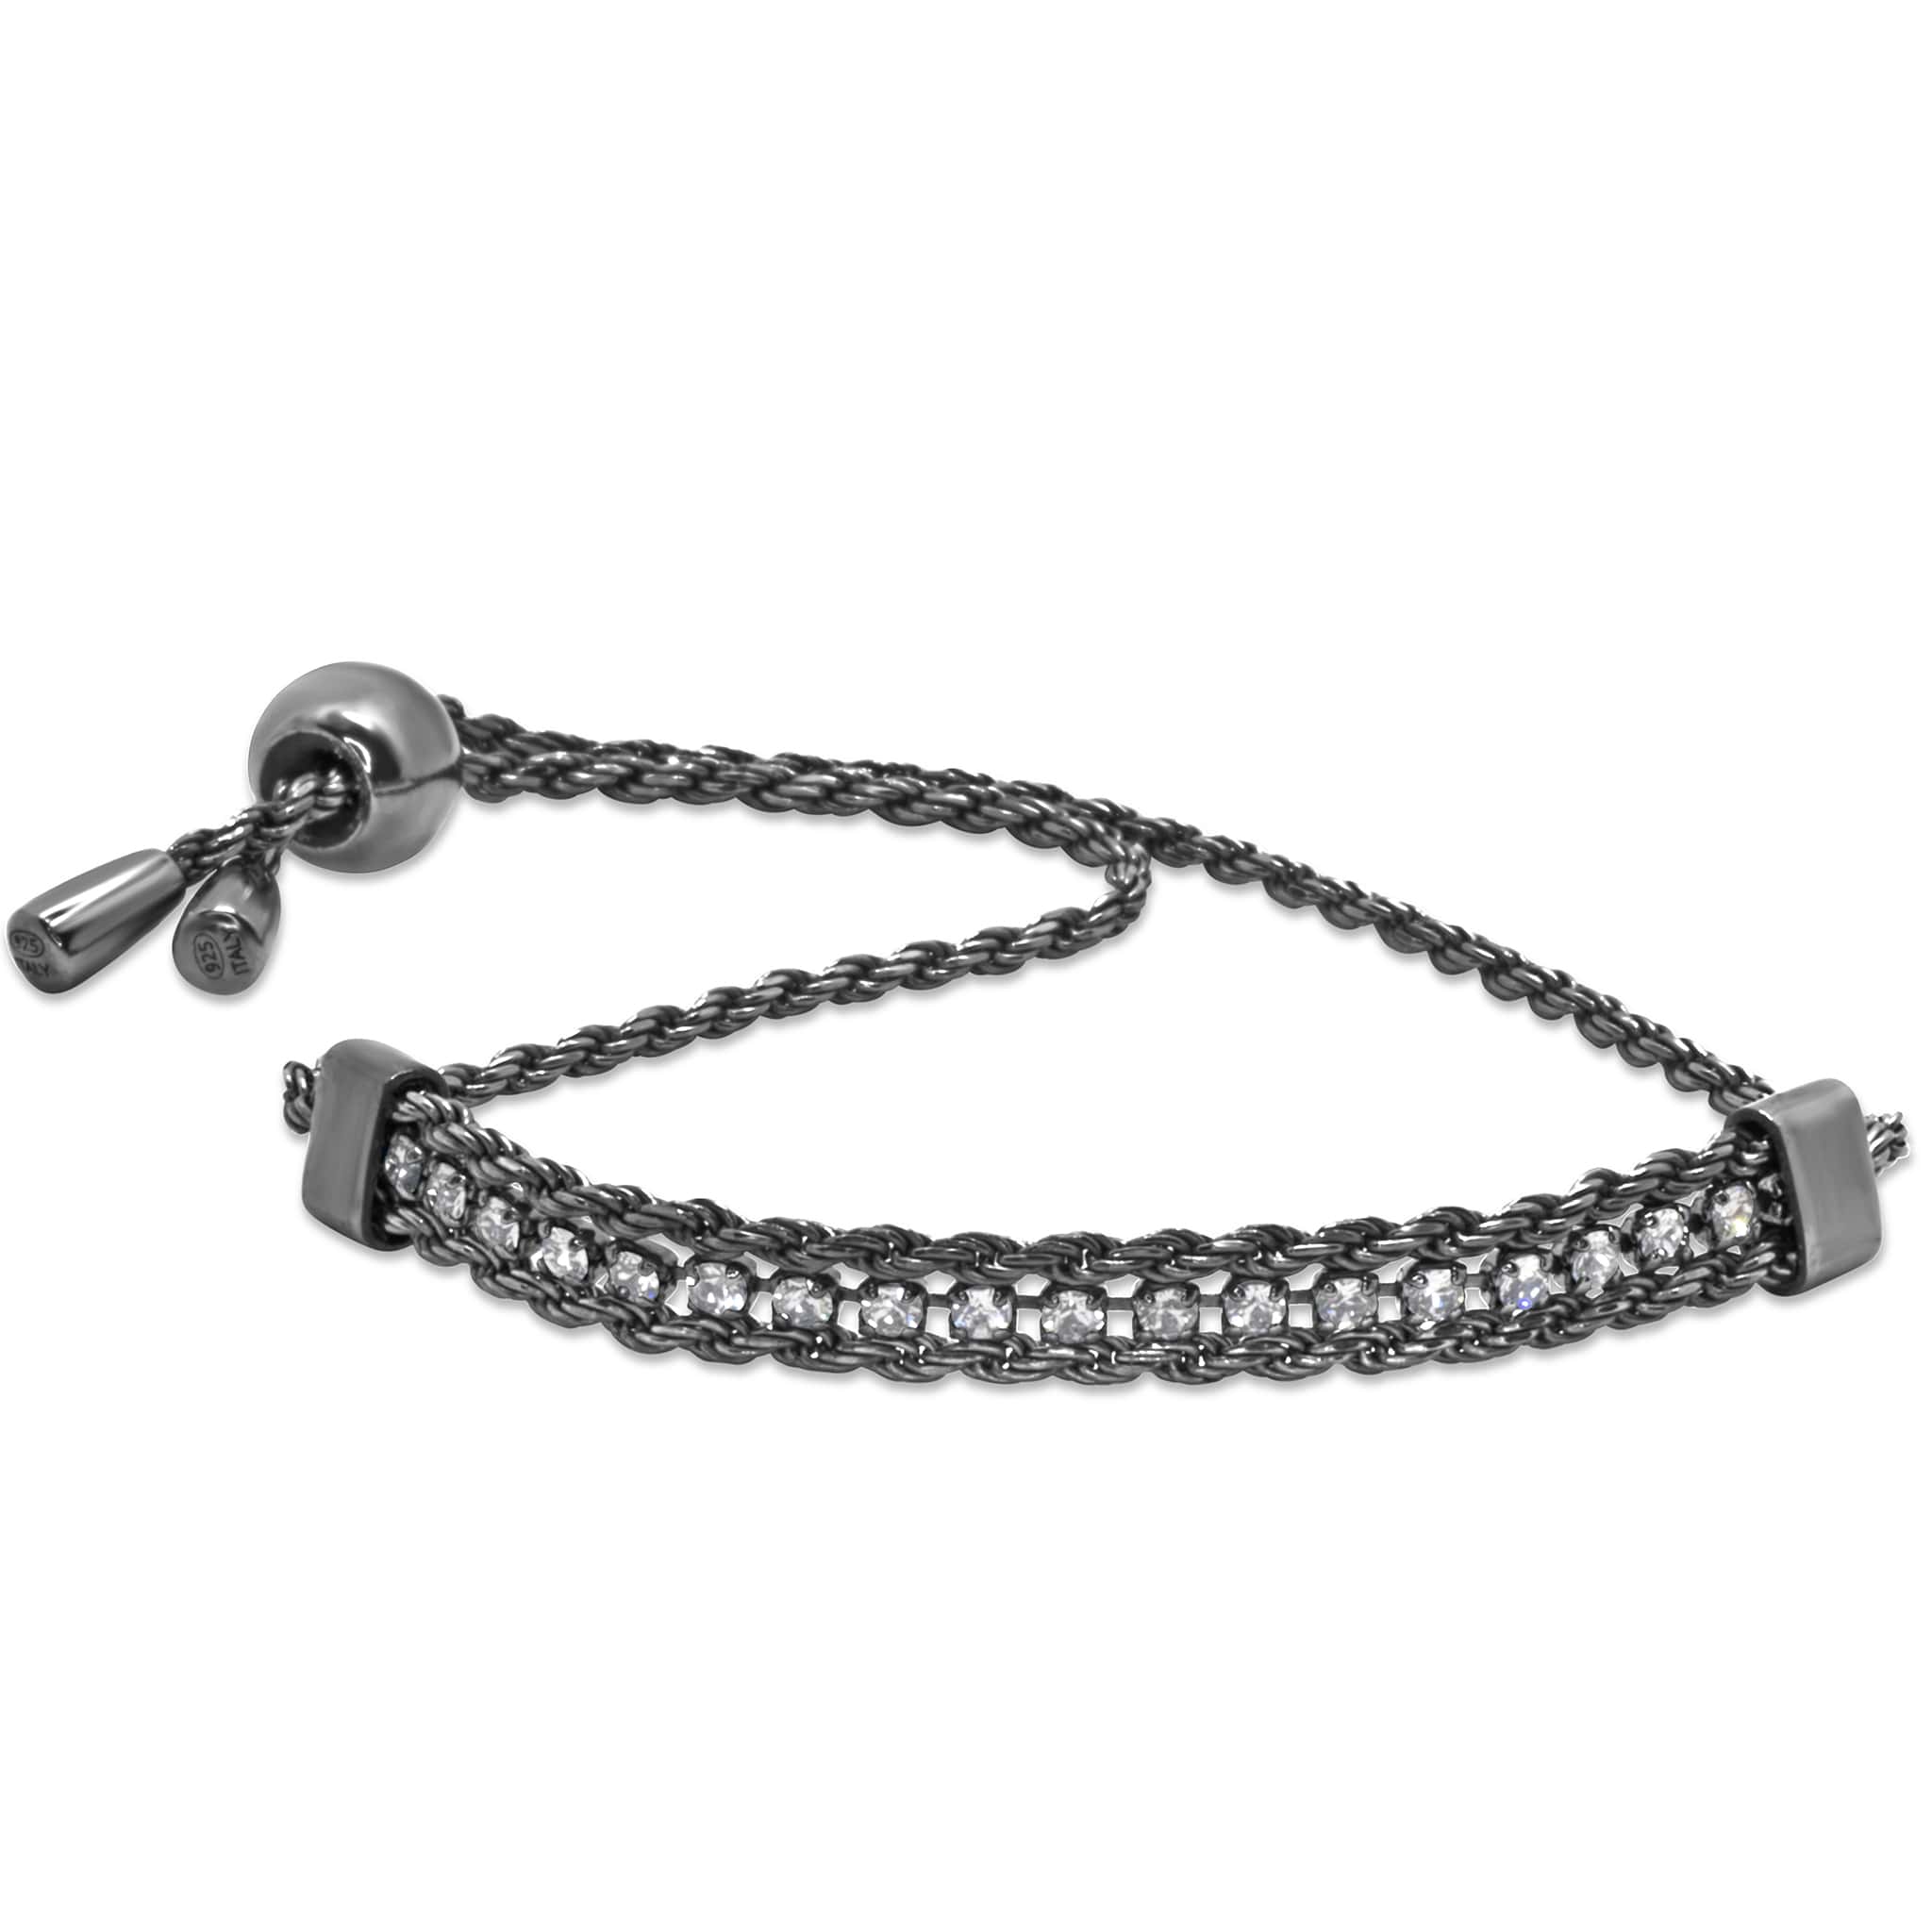 Black tennis bracelet with knotted chain link